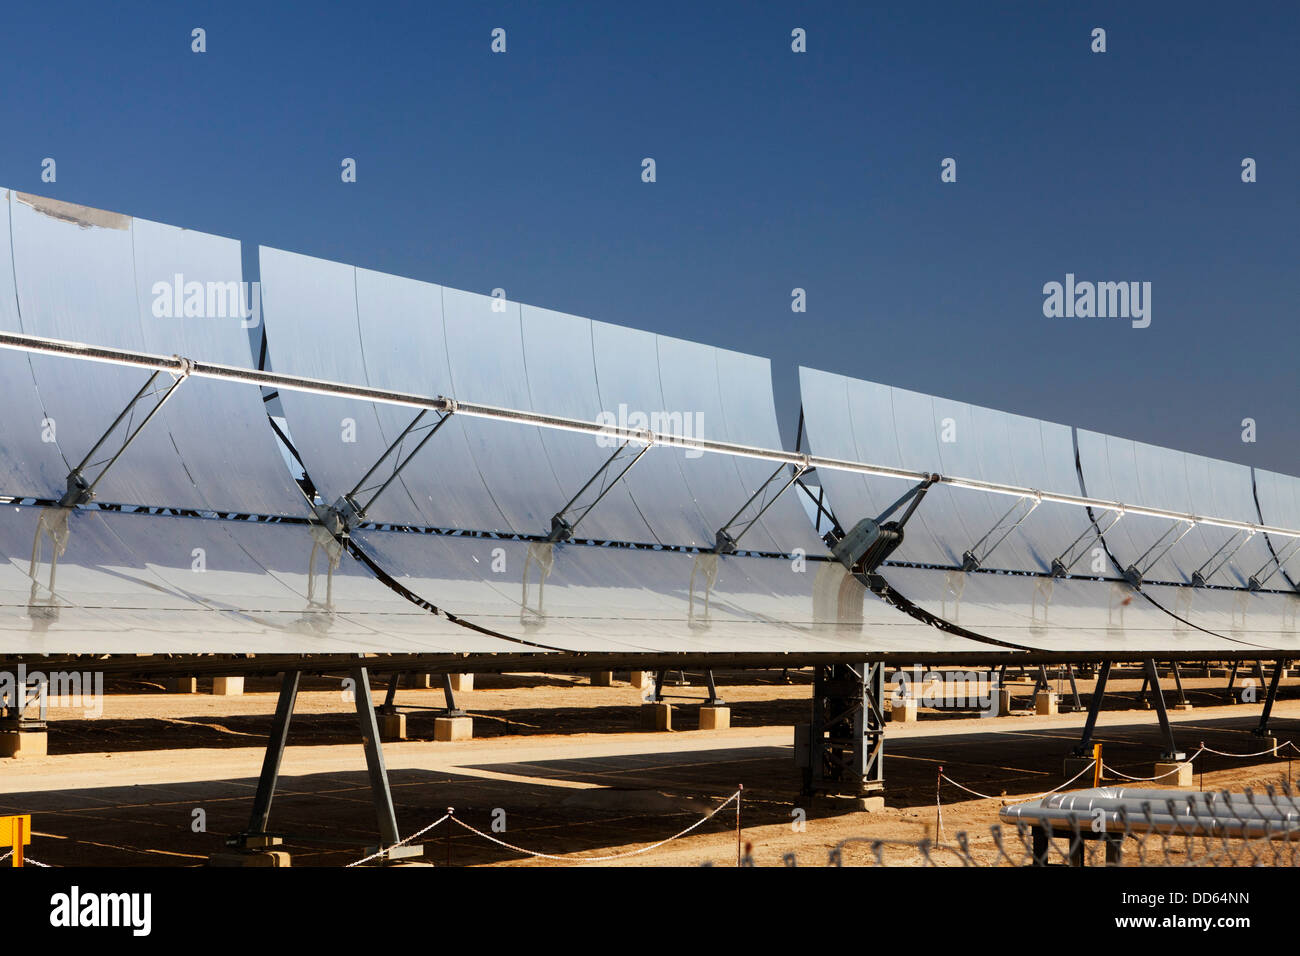 Solucar solar thermal complex near seville Spain includes the PS10 & PS20 solar thermal power and Solnova solar power stations. Stock Photo